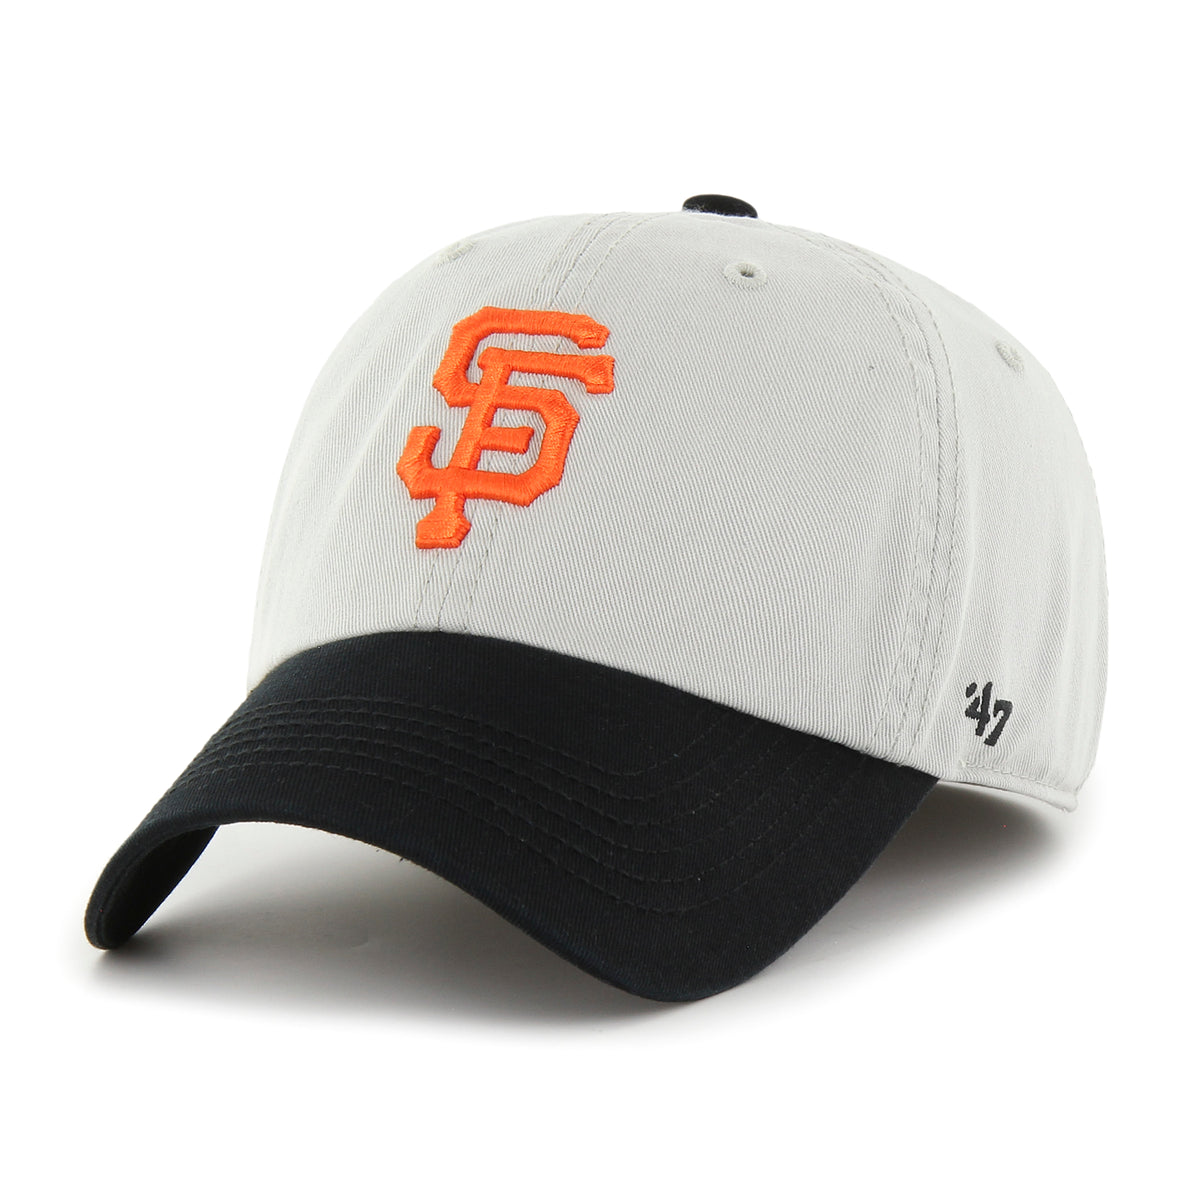 SAN FRANCISCO GIANTS COOPERSTOWN WORLD SERIES SURE SHOT CLASSIC TWO TONE '47 FRANCHISE